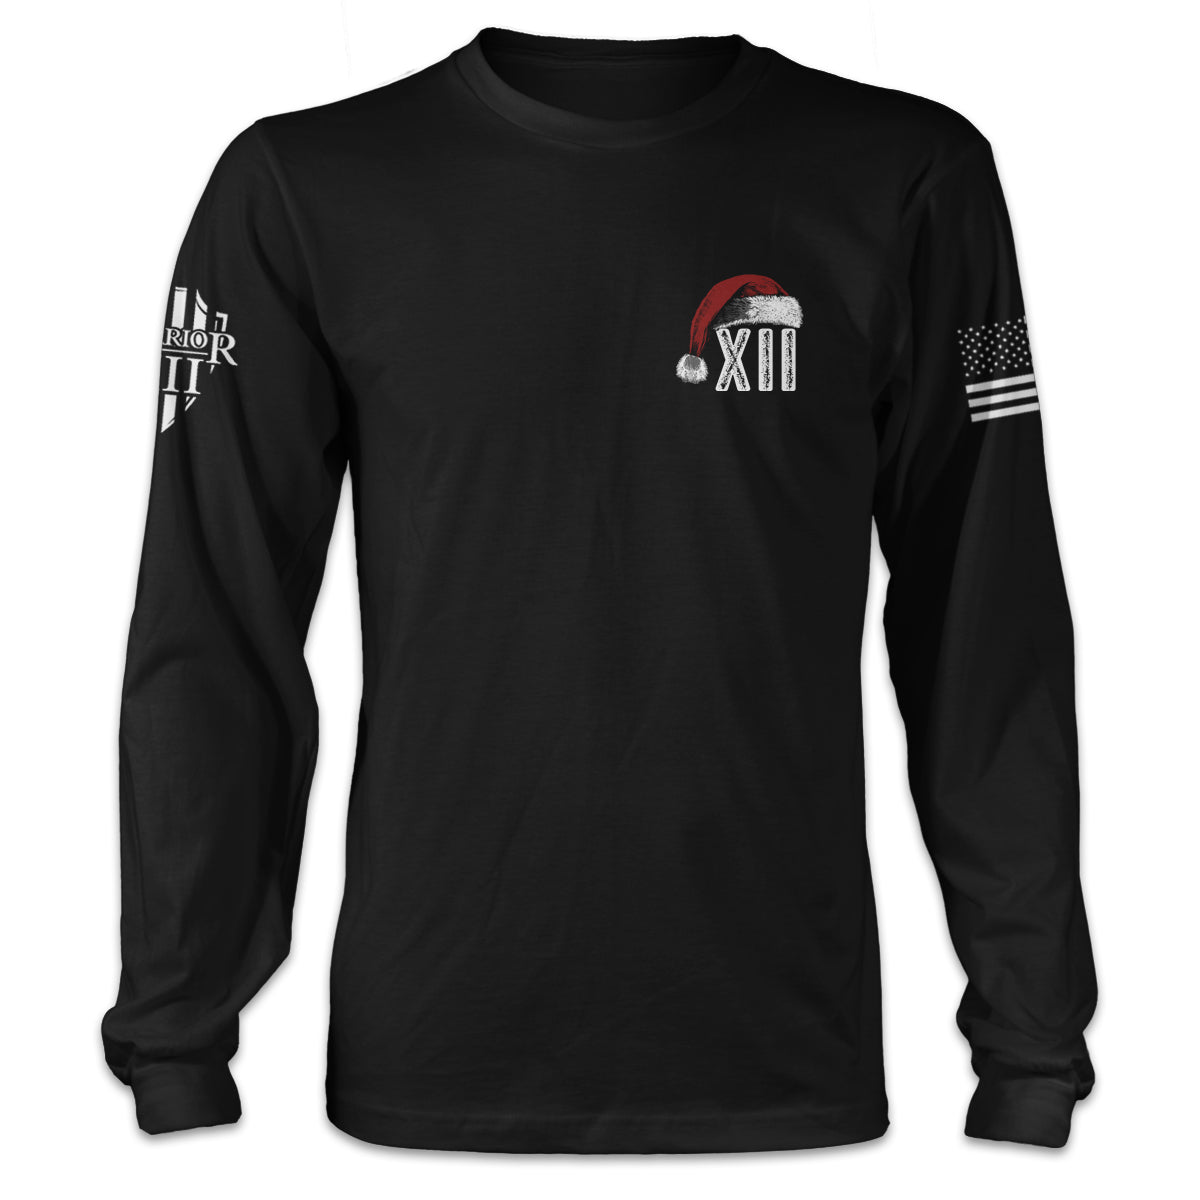 A black long sleeve shirt showing the front featuring a small pocket image of a Santa hat.